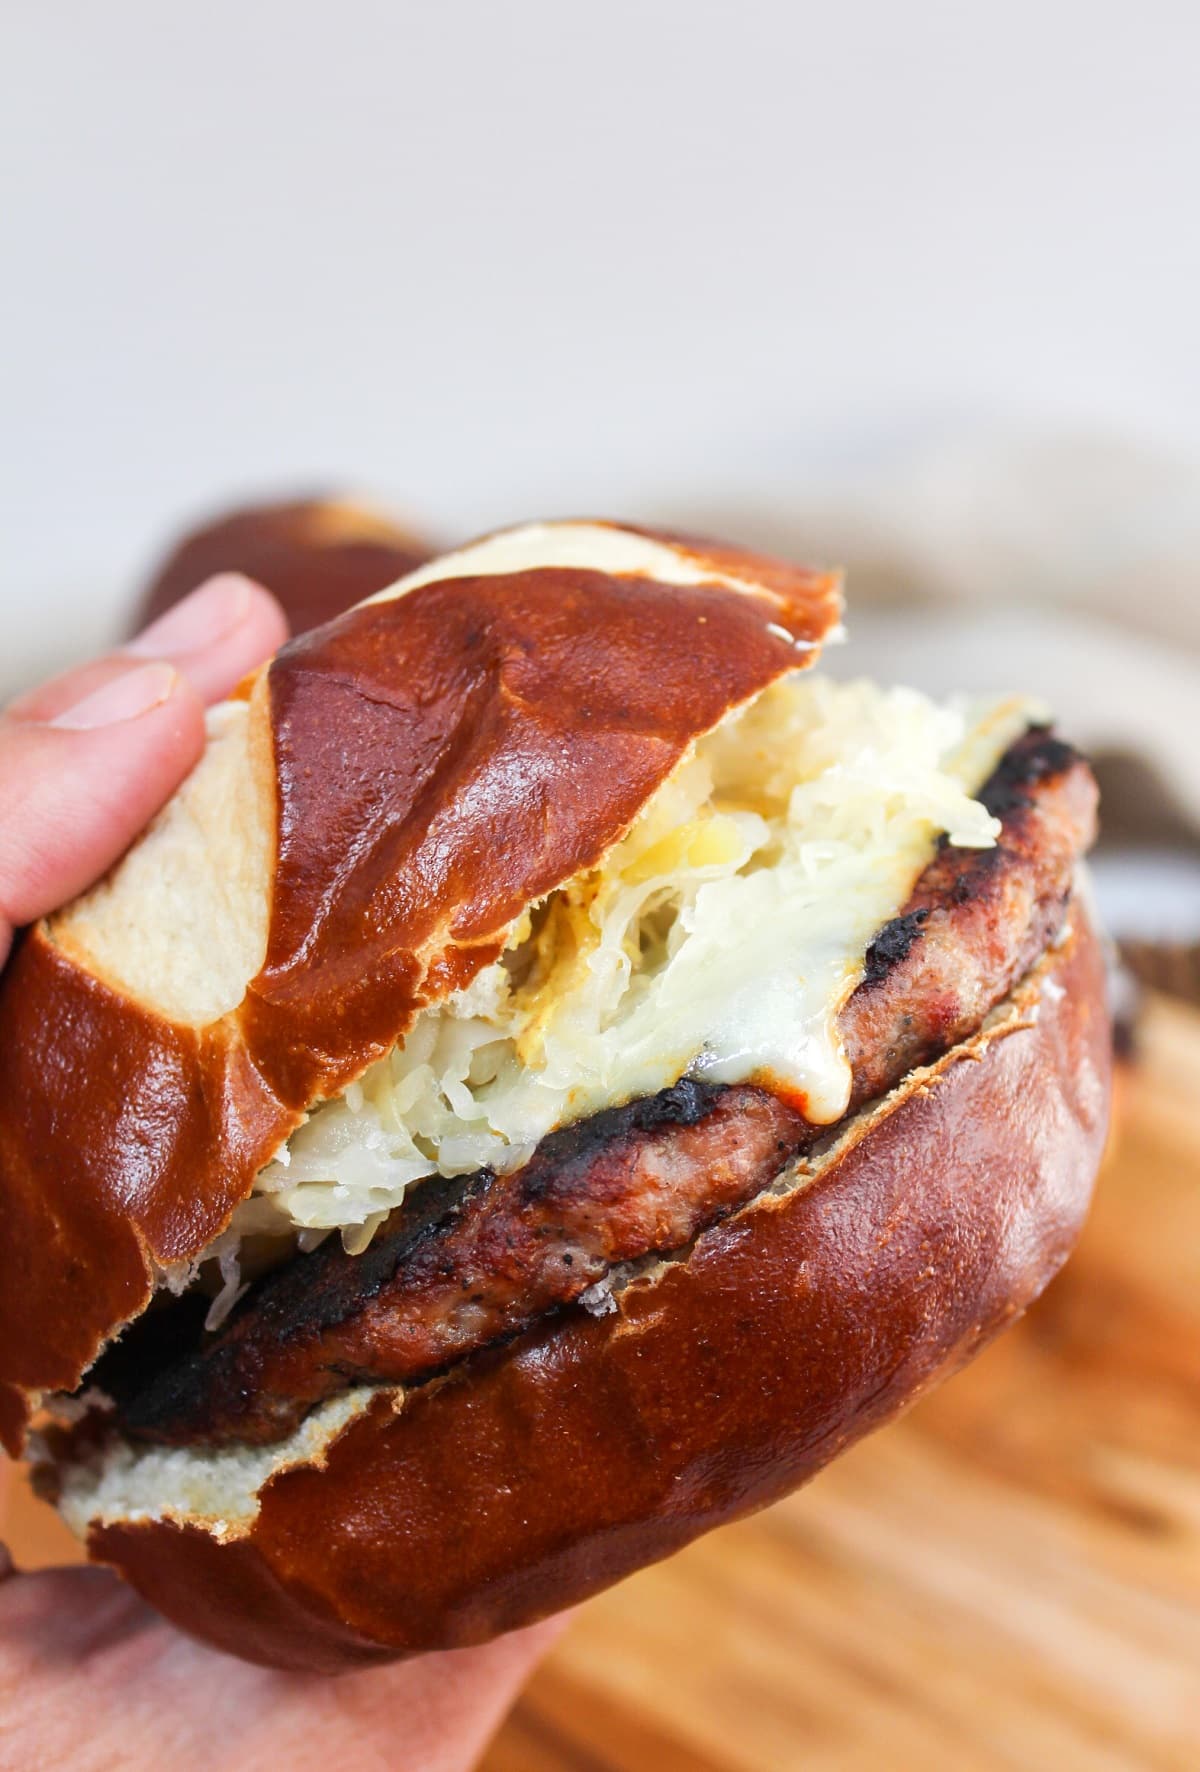 grilled brat pattie on a pretzel roll. The meat is cooked and topped with melted cheese, mustard, and sauerkraut. The burger is show in a sideview because it is held in hand.